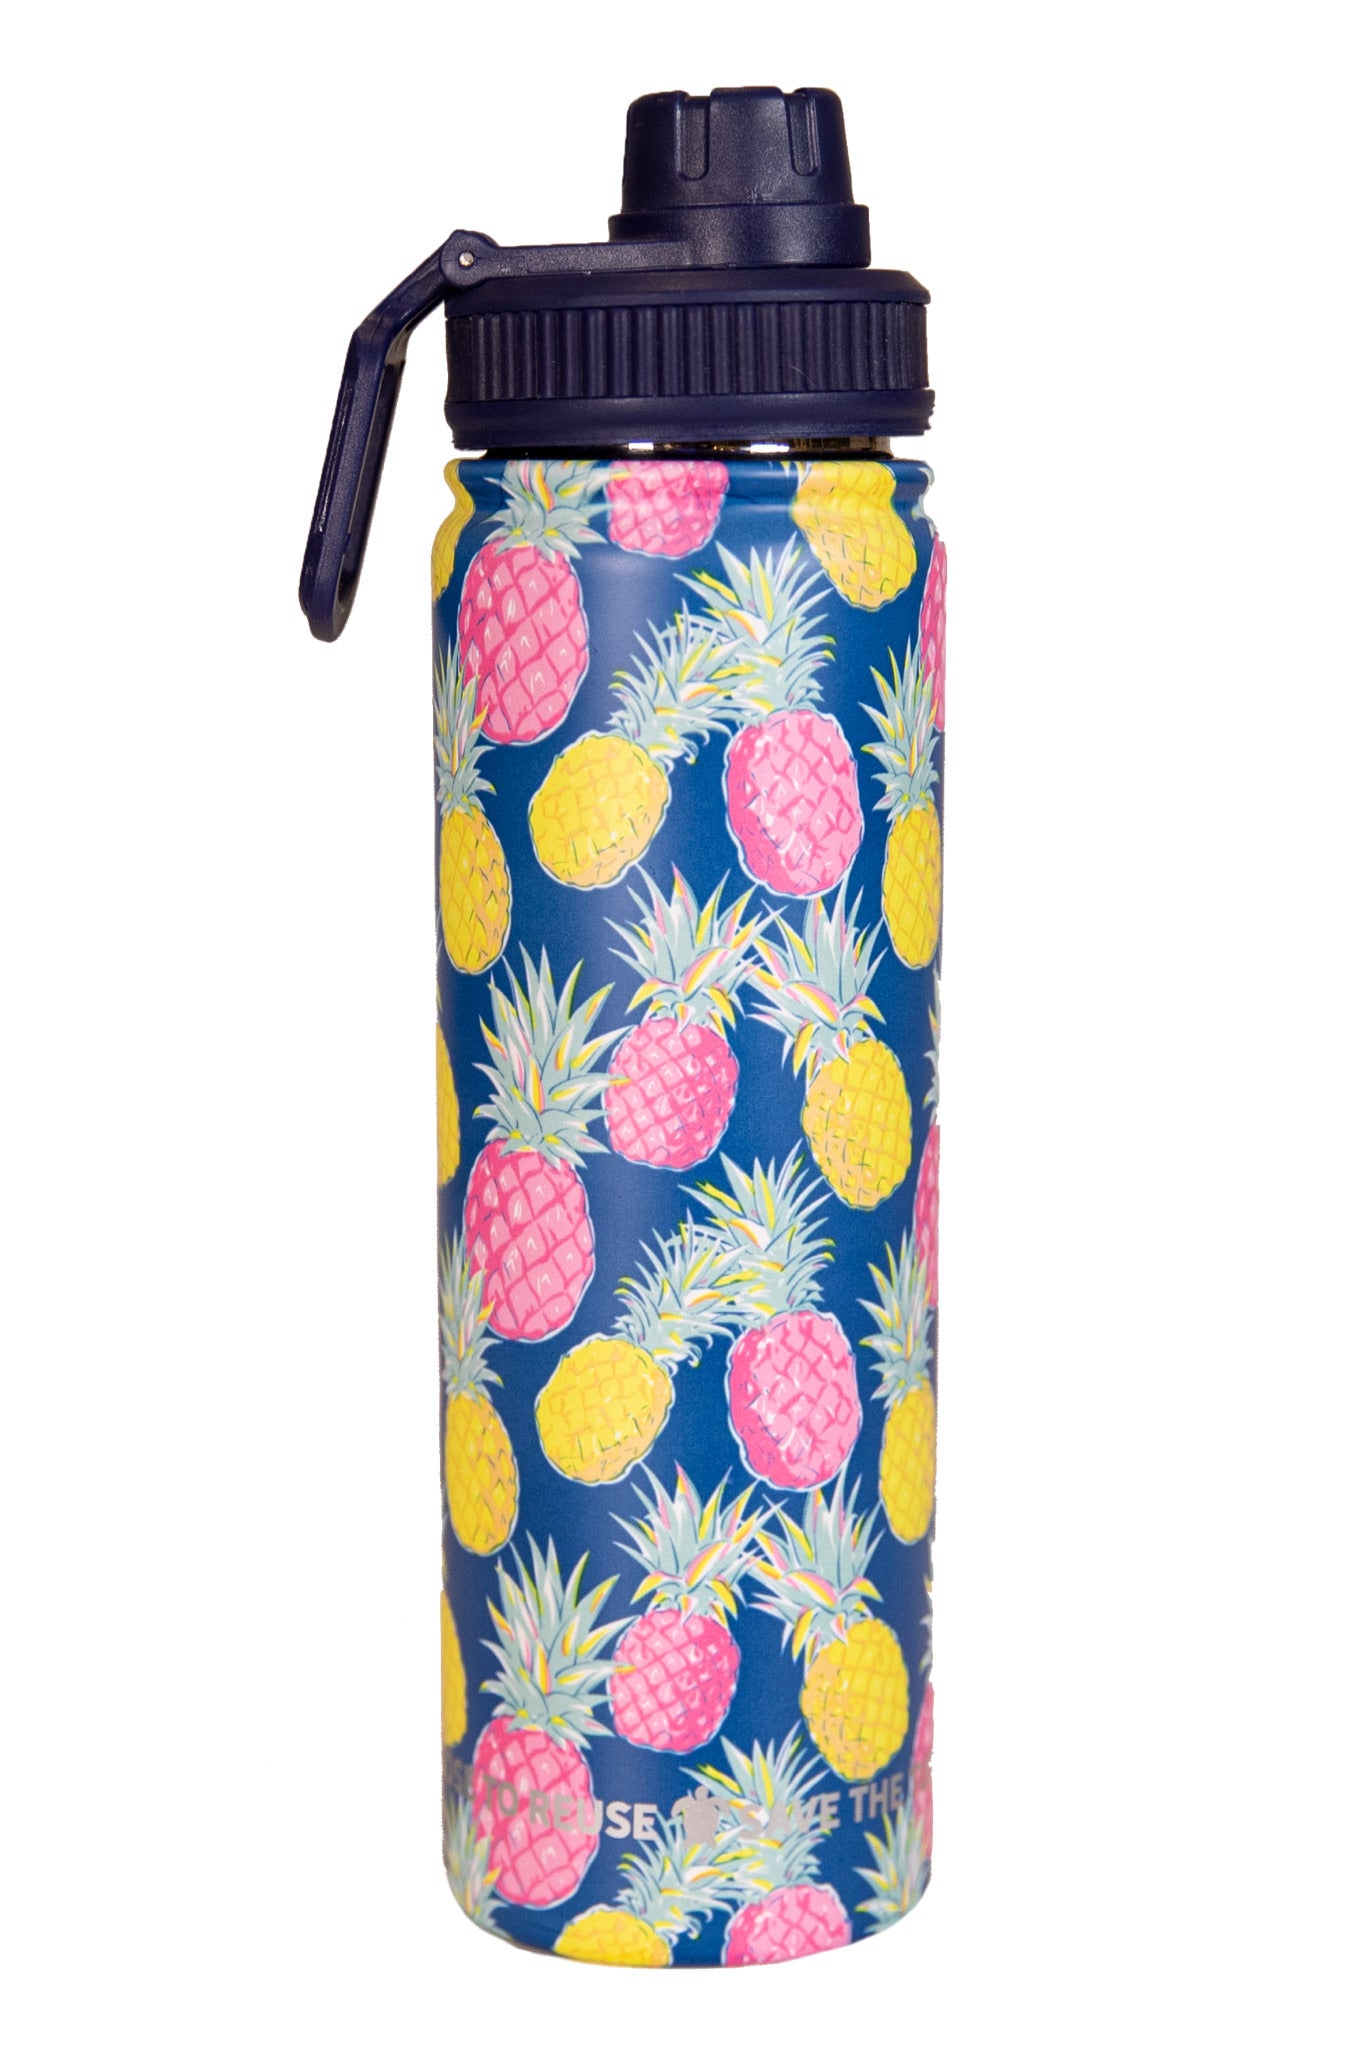 Simply Southern "Pineapple" Drinkware